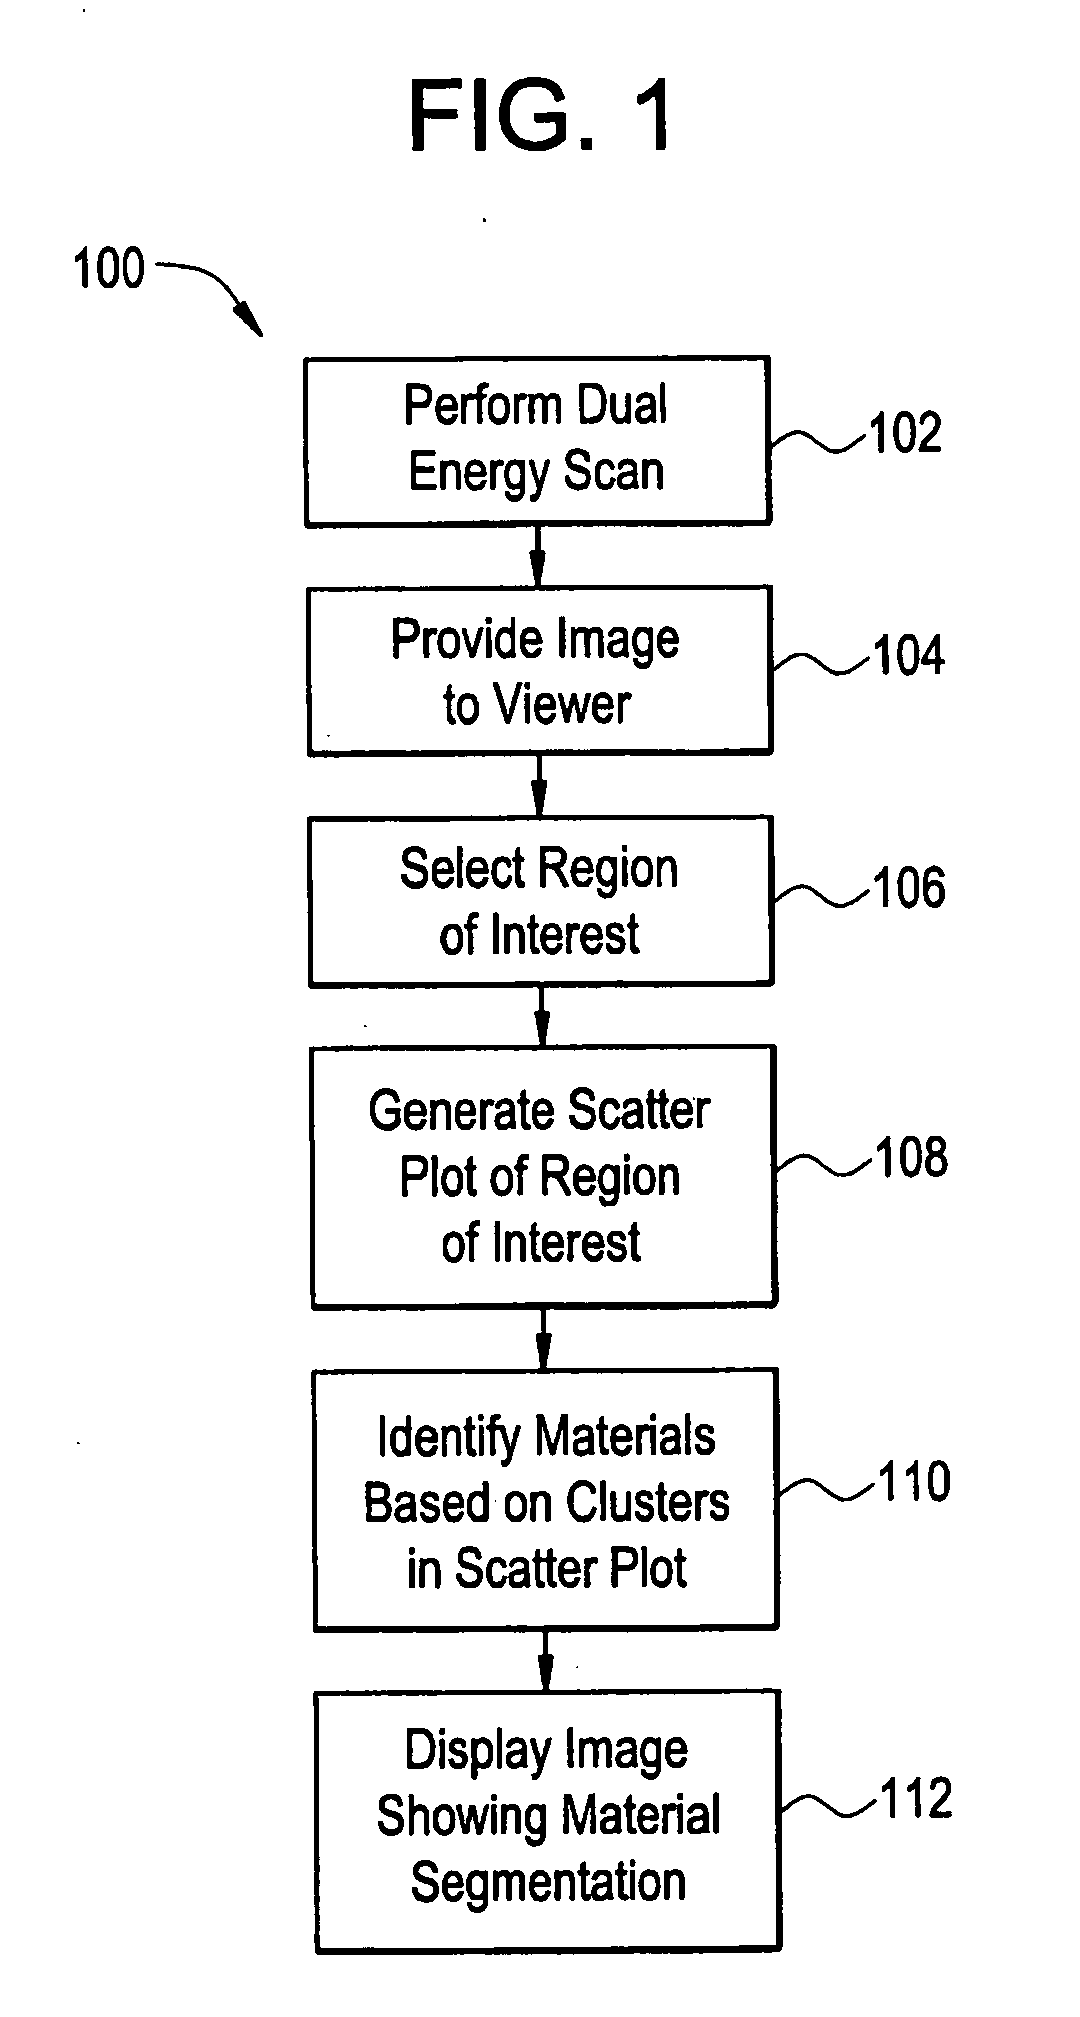 System and Method for Material Segmentation Utilizing Computed Tomography Scans